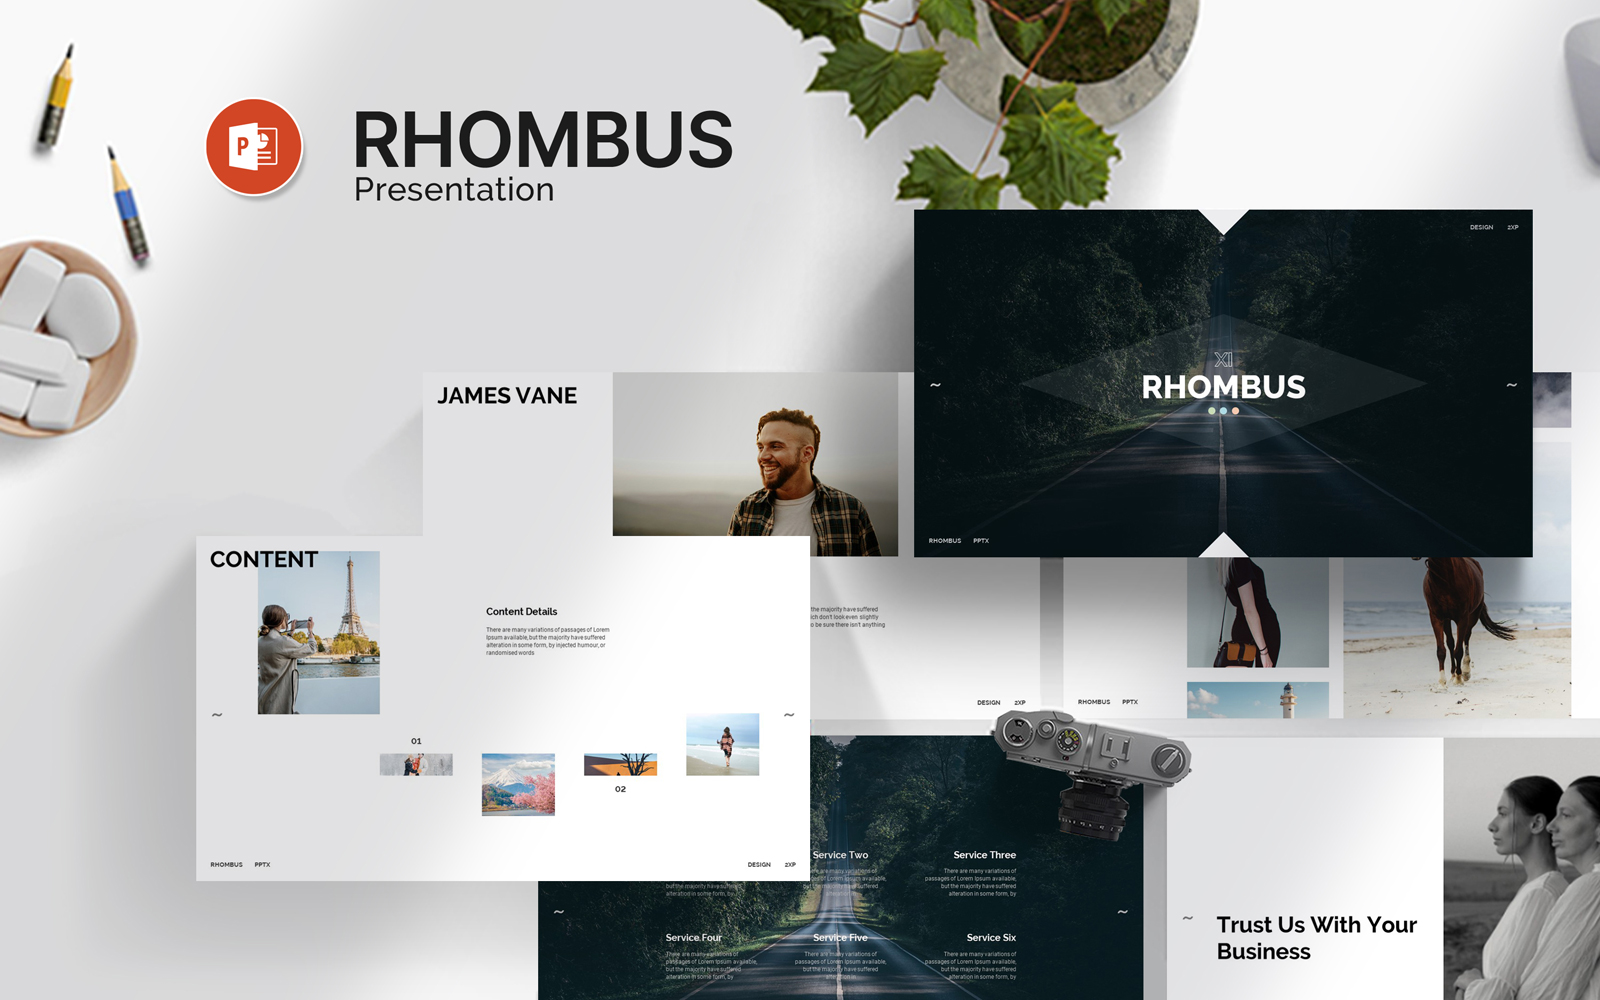 The Rhombus PowerPoint Template